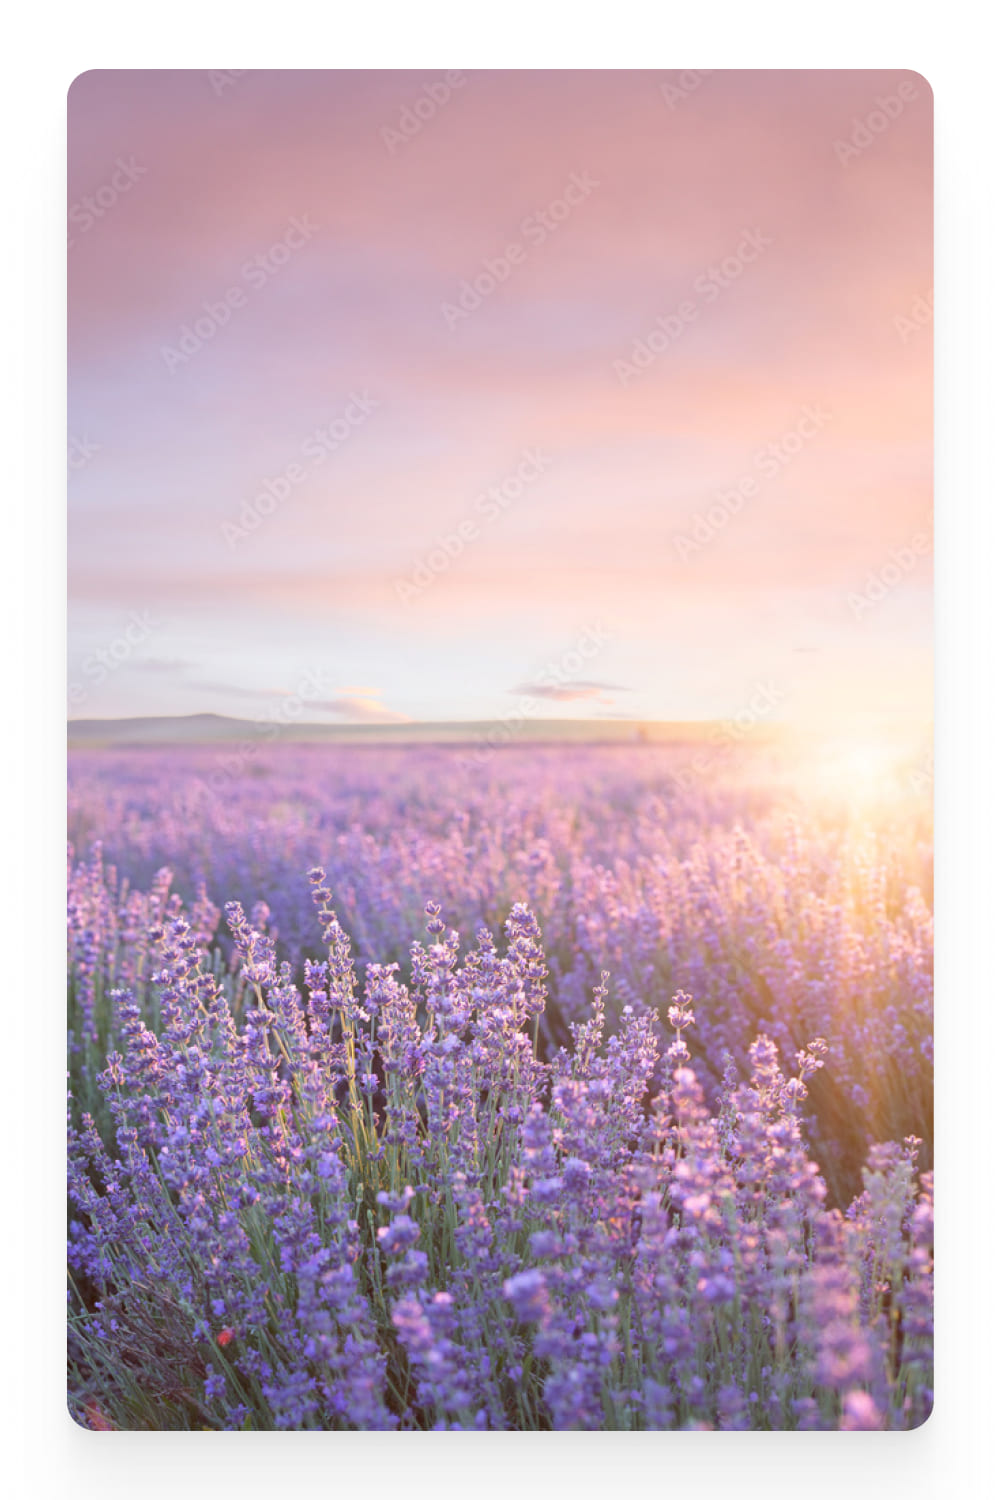 Photo of a lavender field at sunrise.